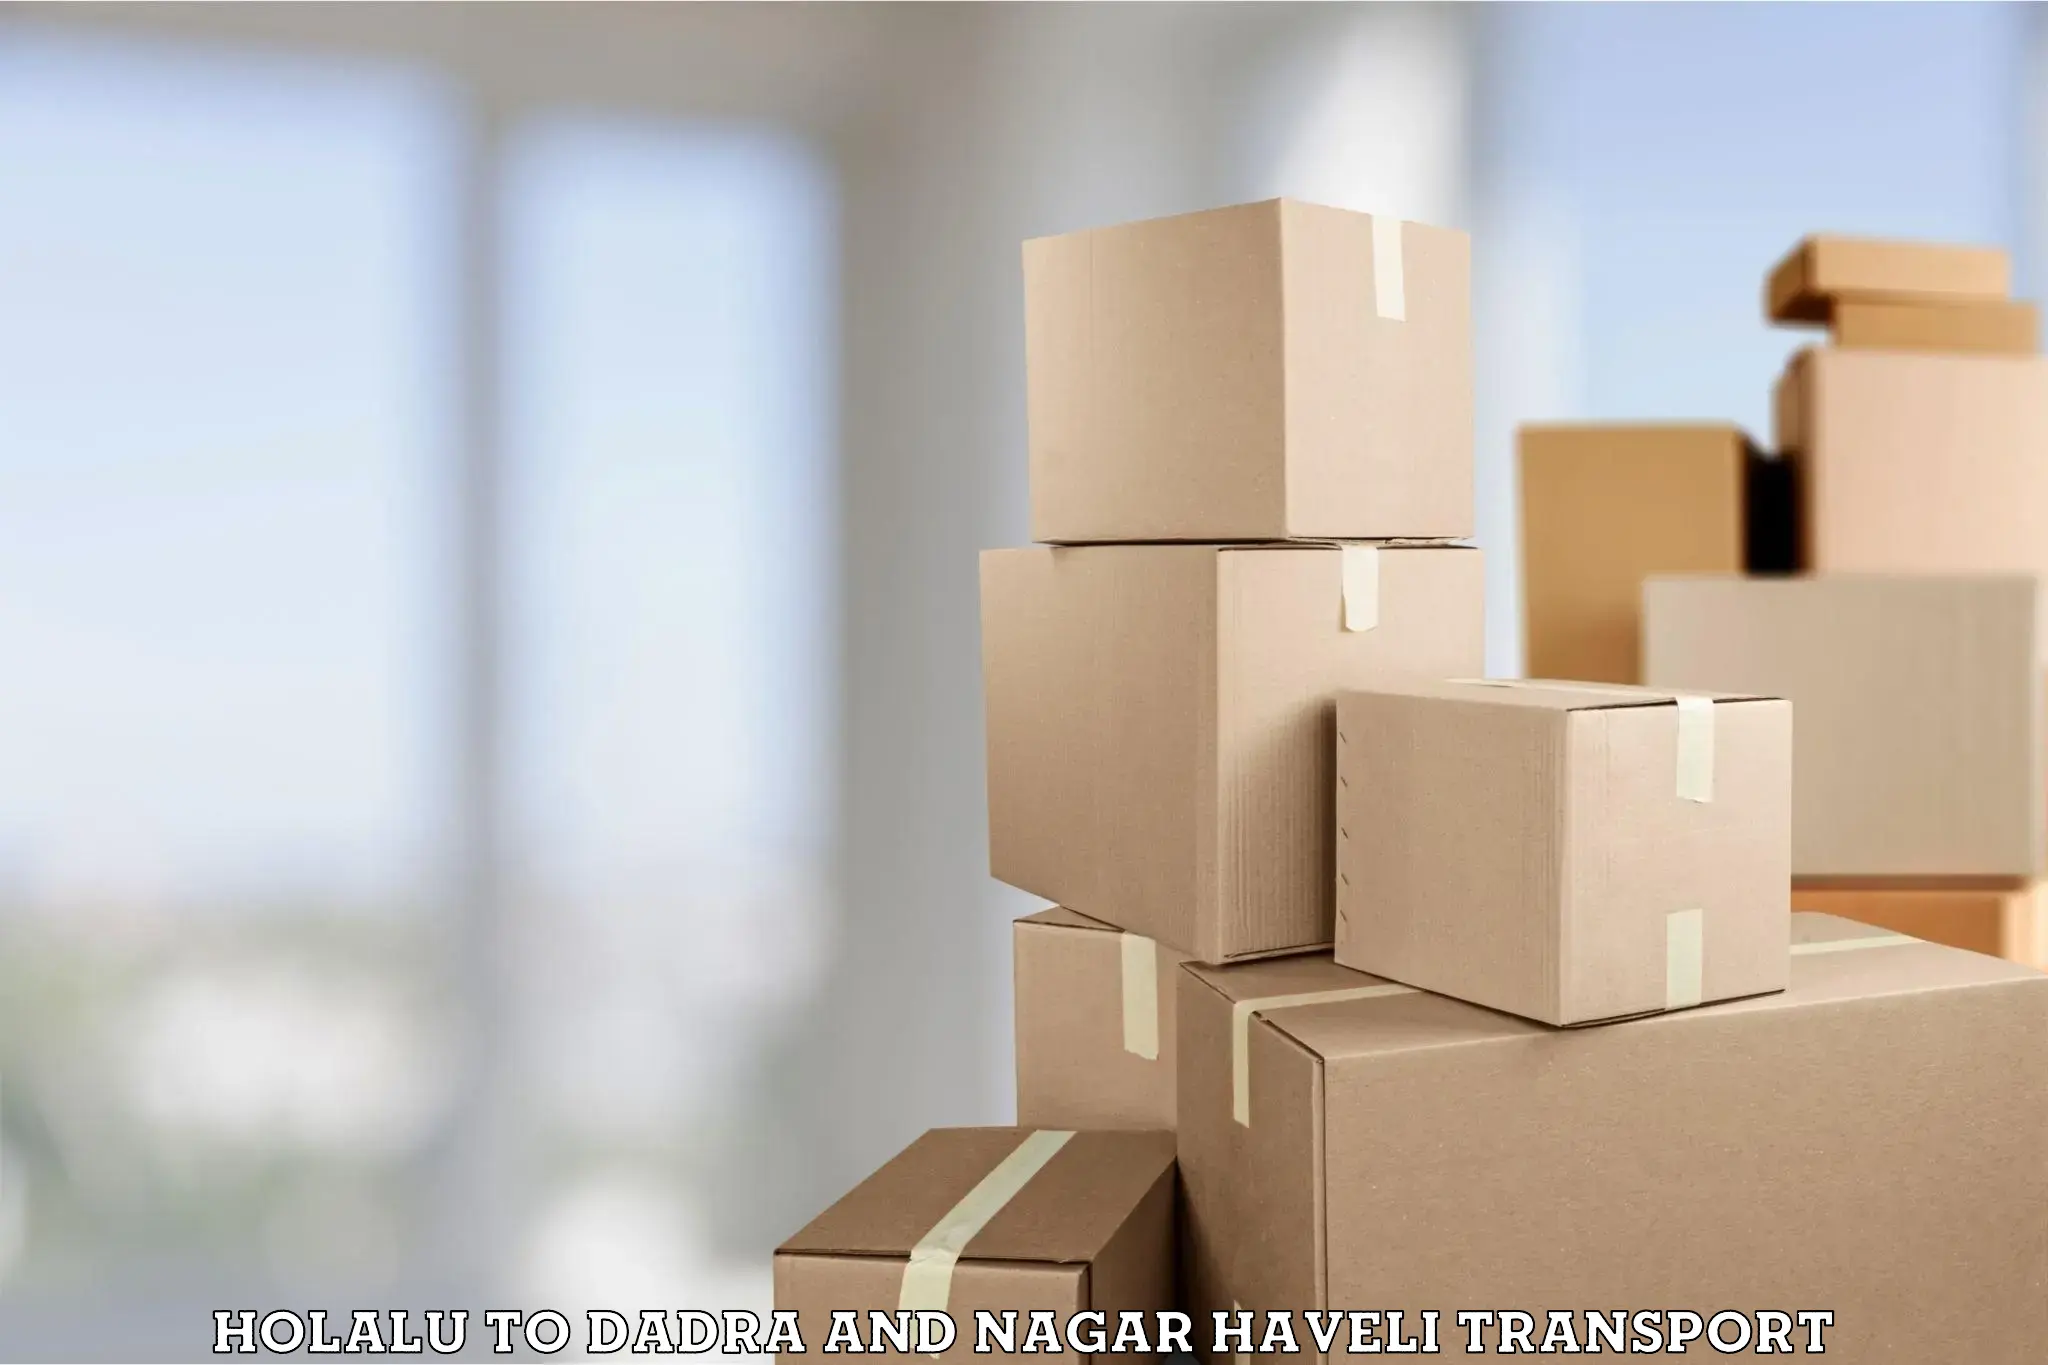 Container transport service Holalu to Dadra and Nagar Haveli